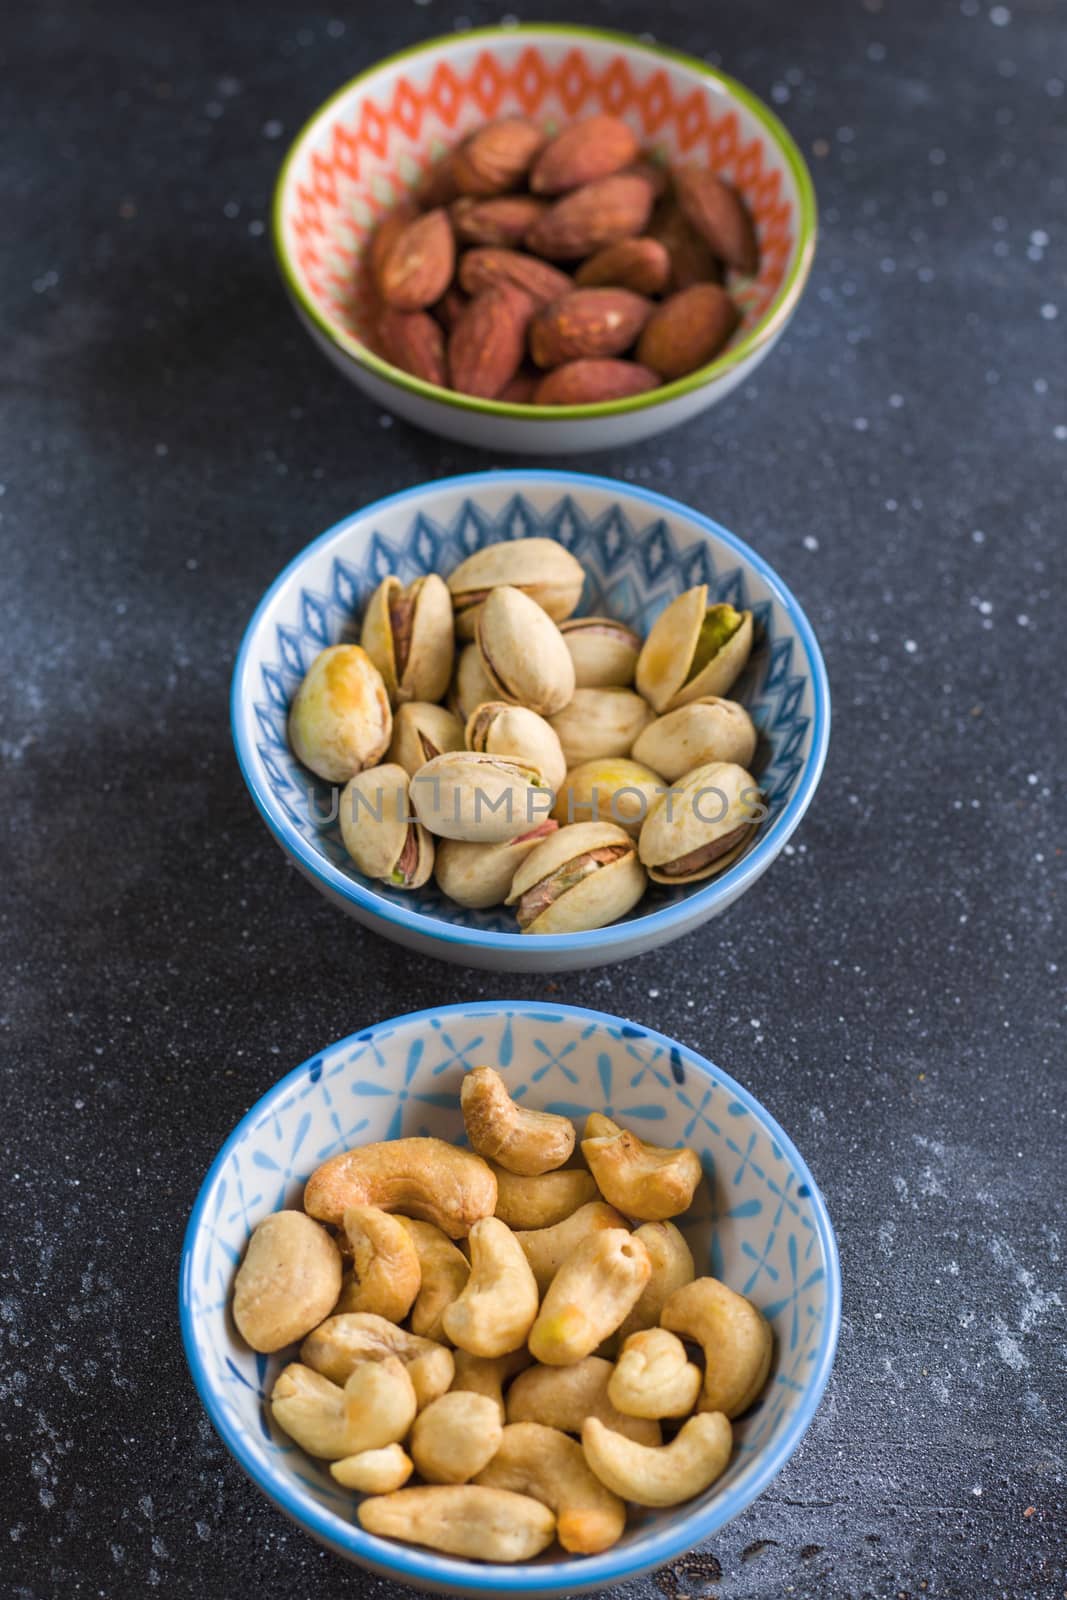 Nuts in bowls on the table, almonds, cashews and coasted nuts on the blue background. by Taidundua